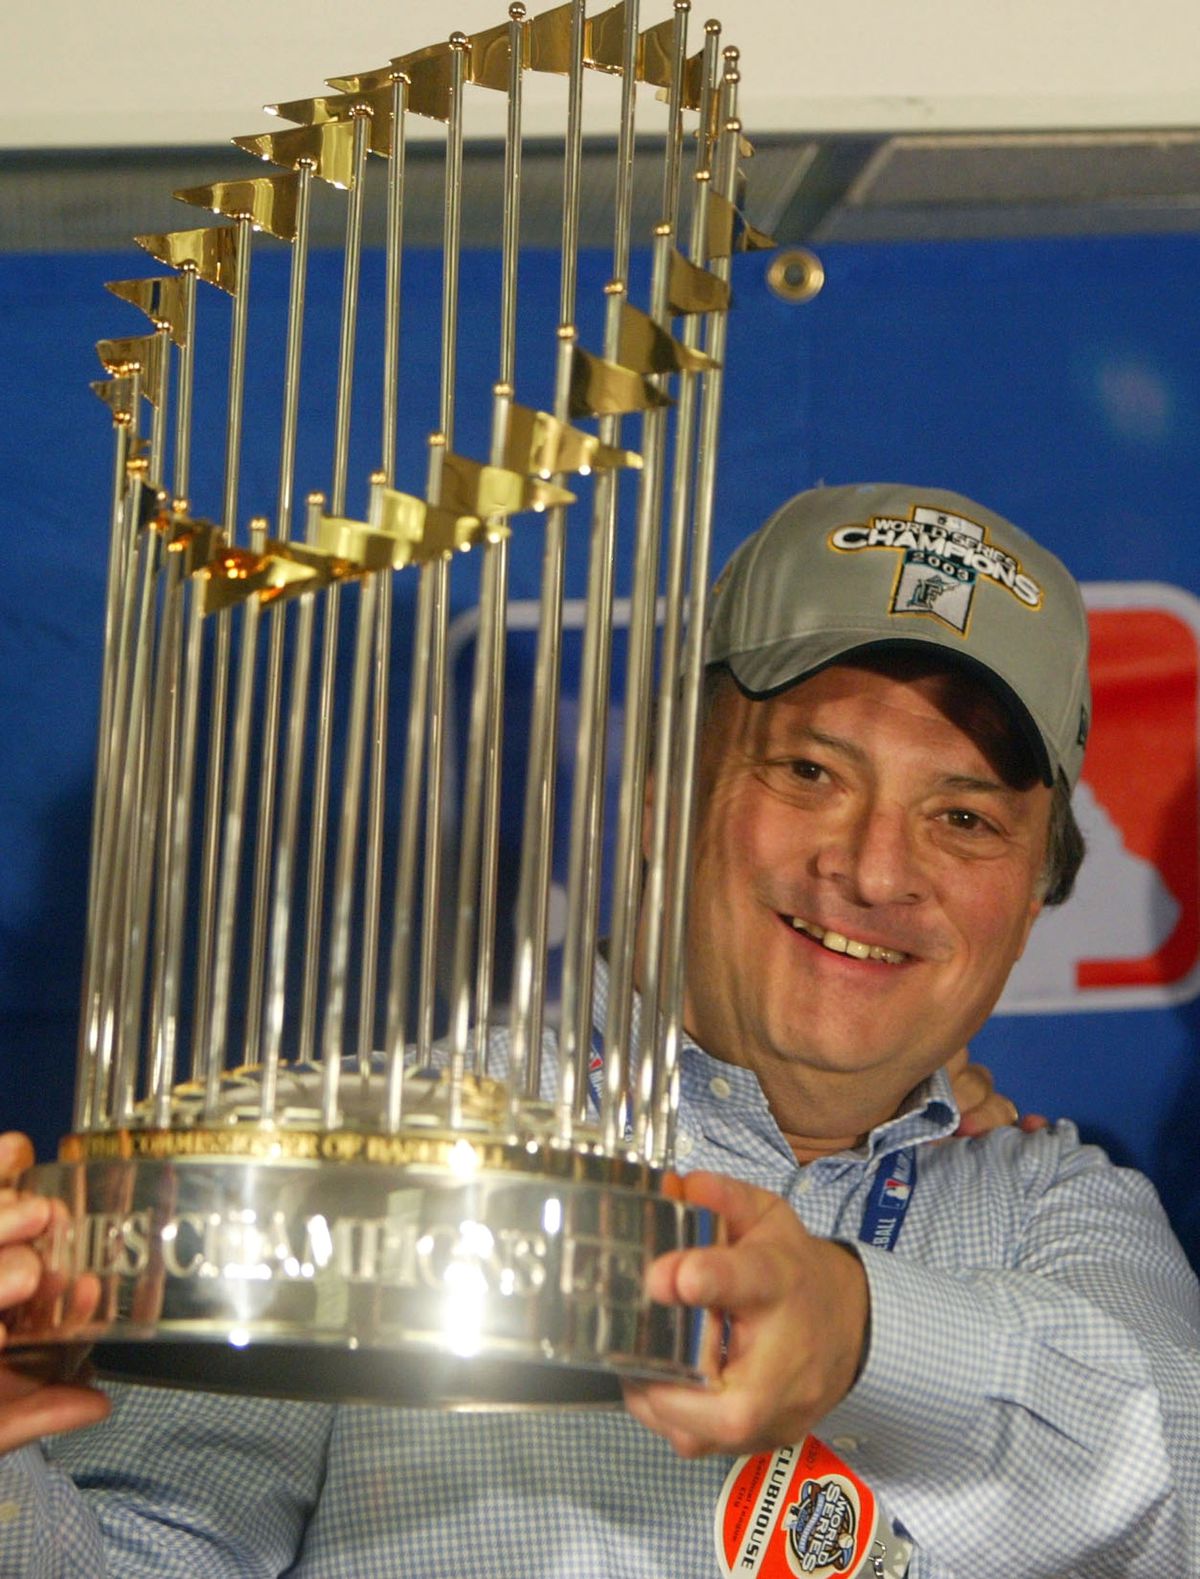 Loria celebrates with the trophy